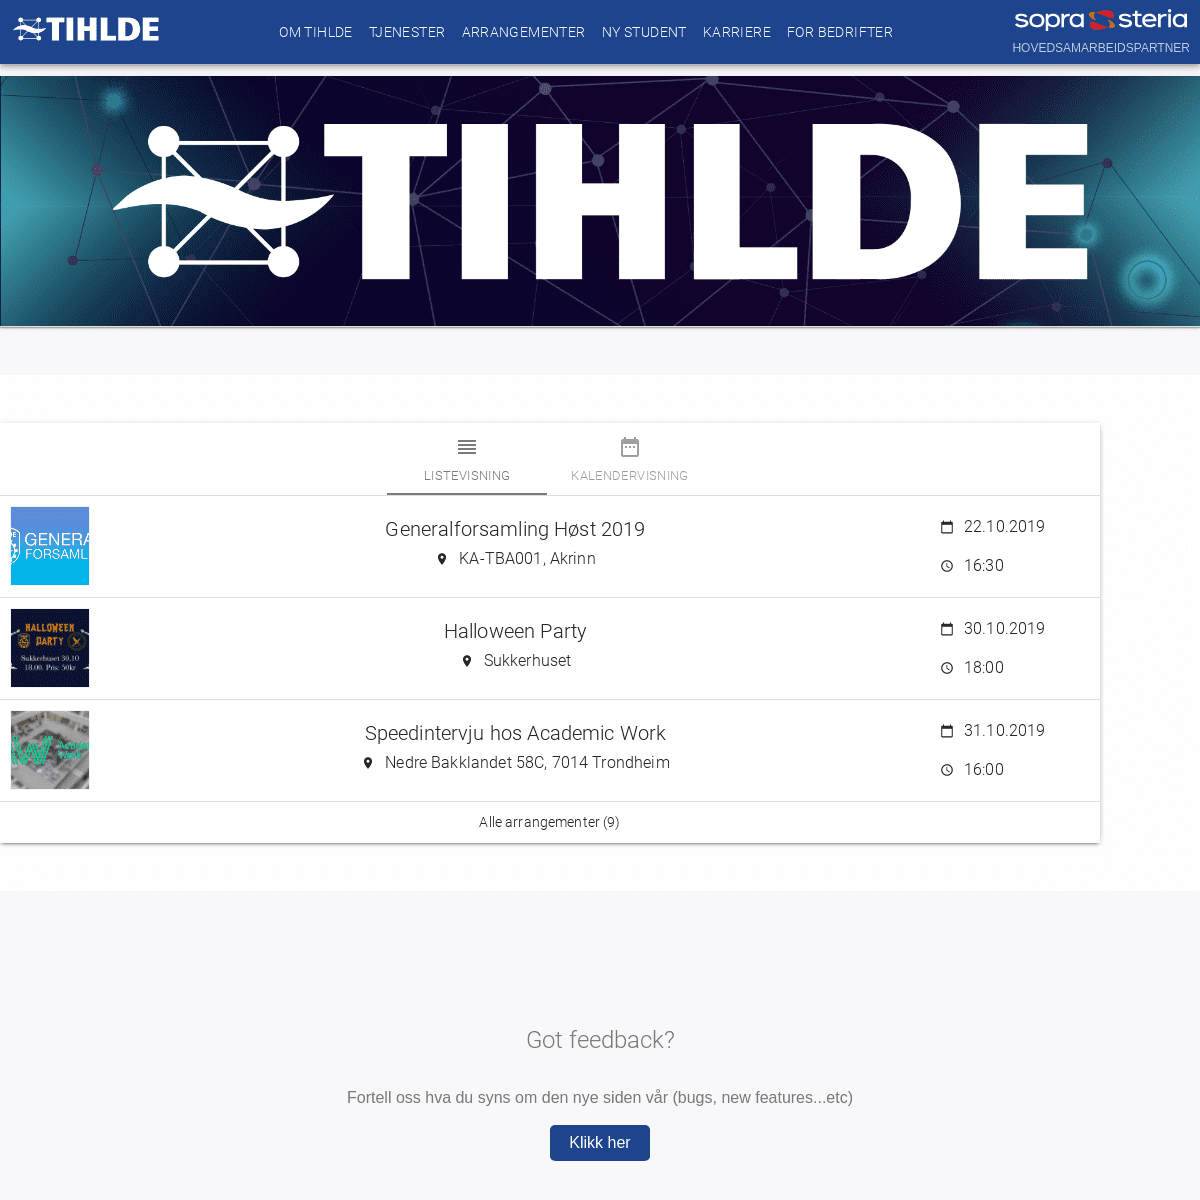 A complete backup of tihlde.org